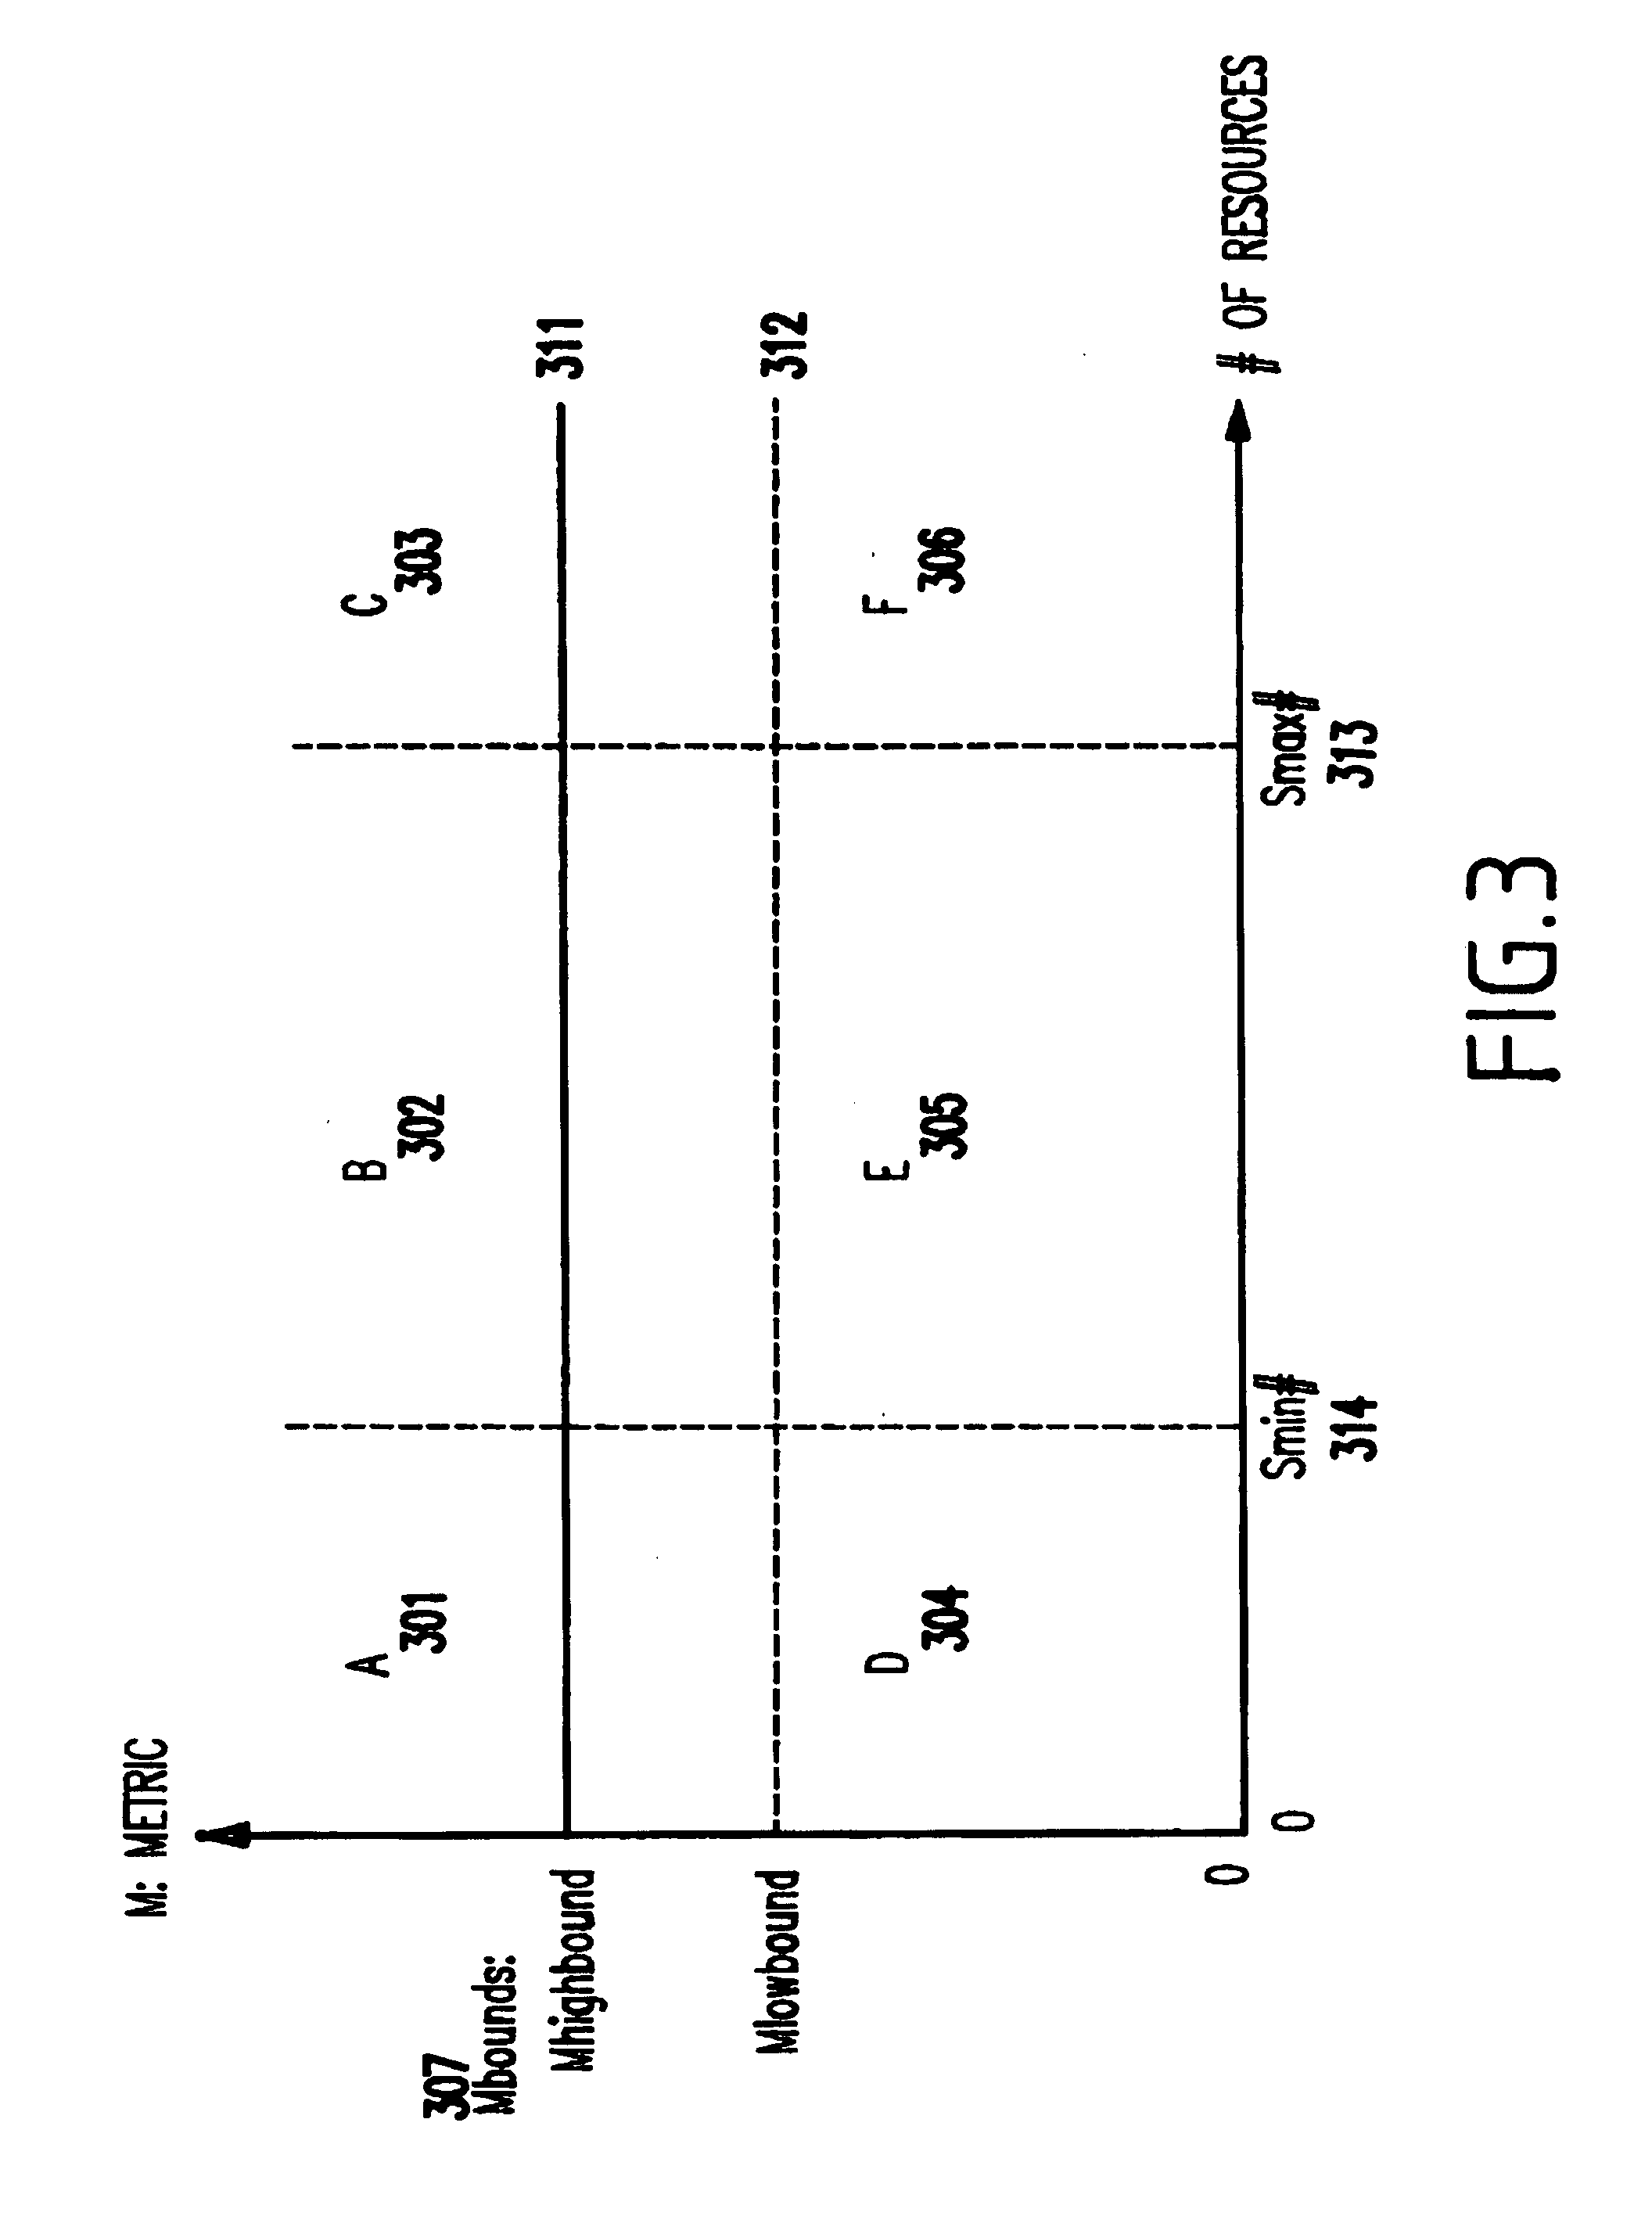 Method and apparatus for dynamically adjusting resources assigned to plurality of customers, for meeting service level agreements (SLAS) with minimal resources, and allowing common pools of resources to be used across plural customers on a demand basis